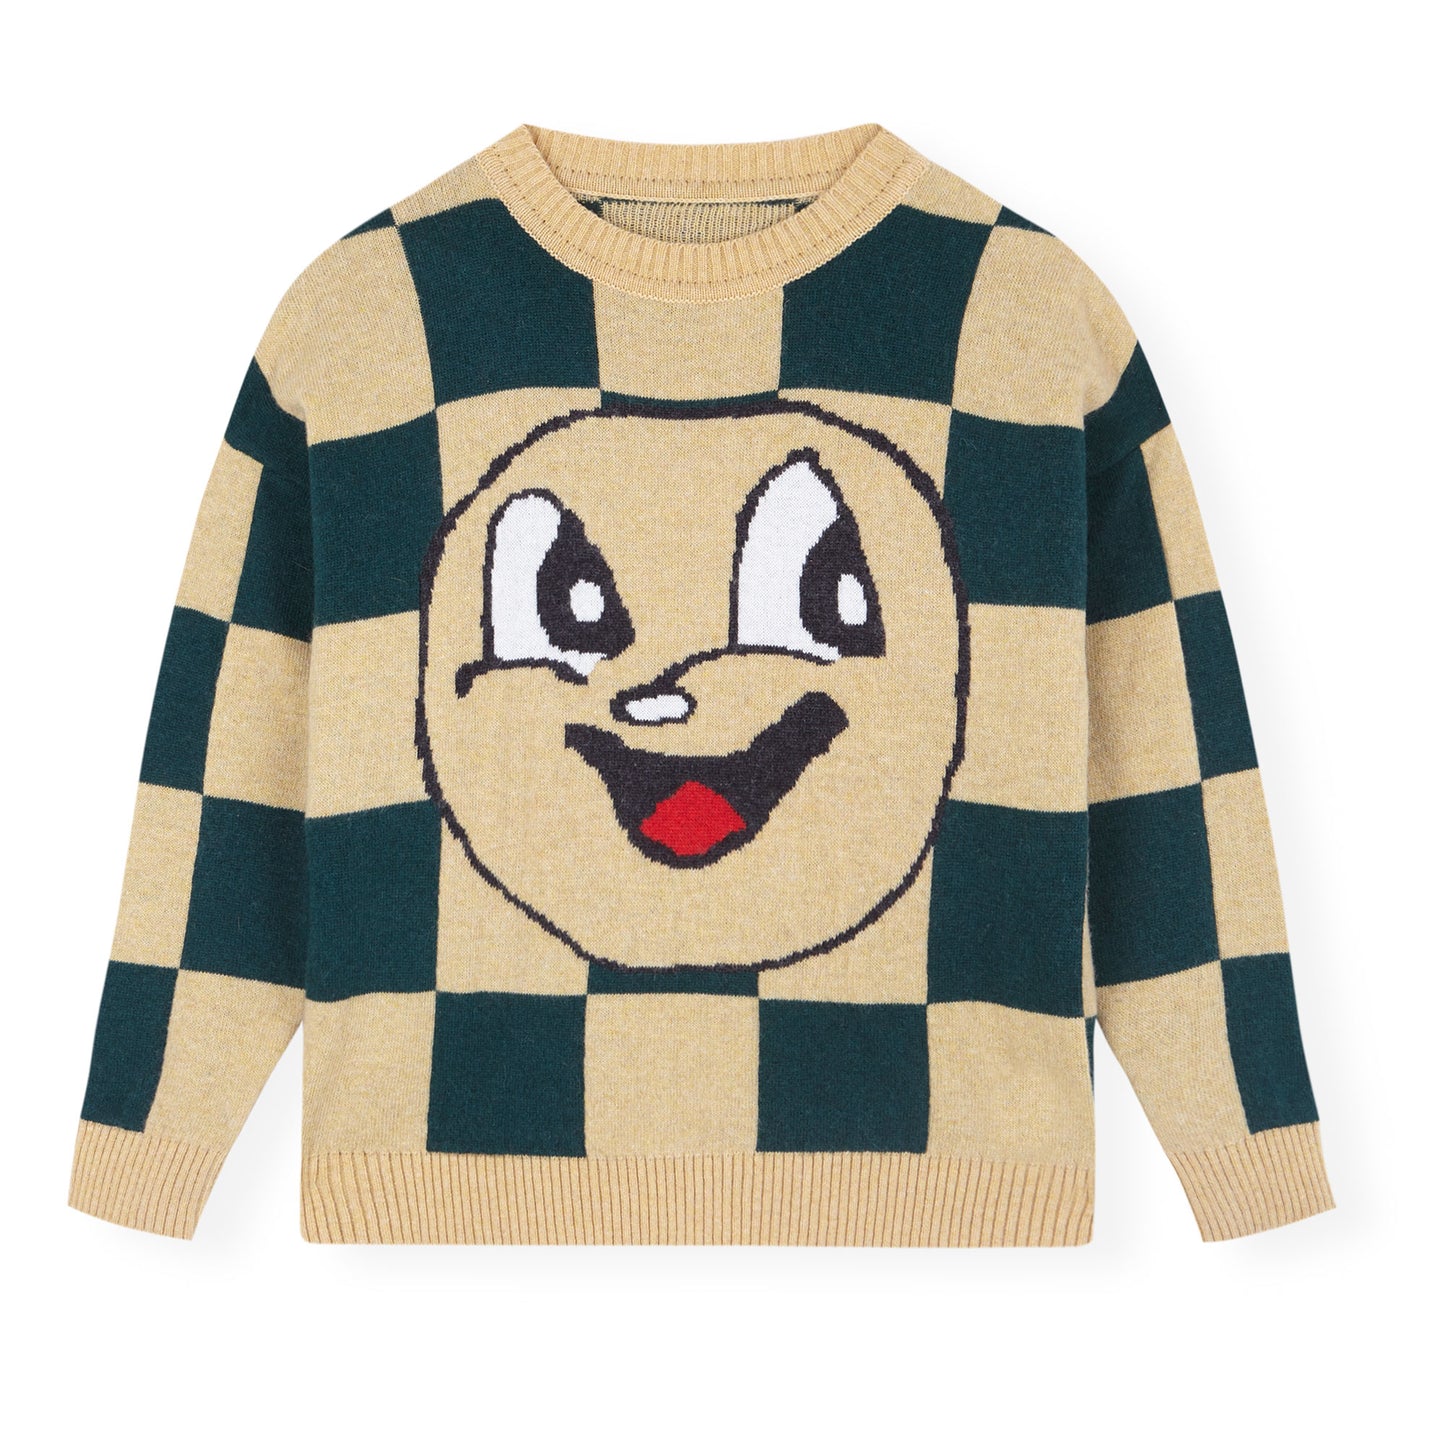 Smiley Chess Jumper